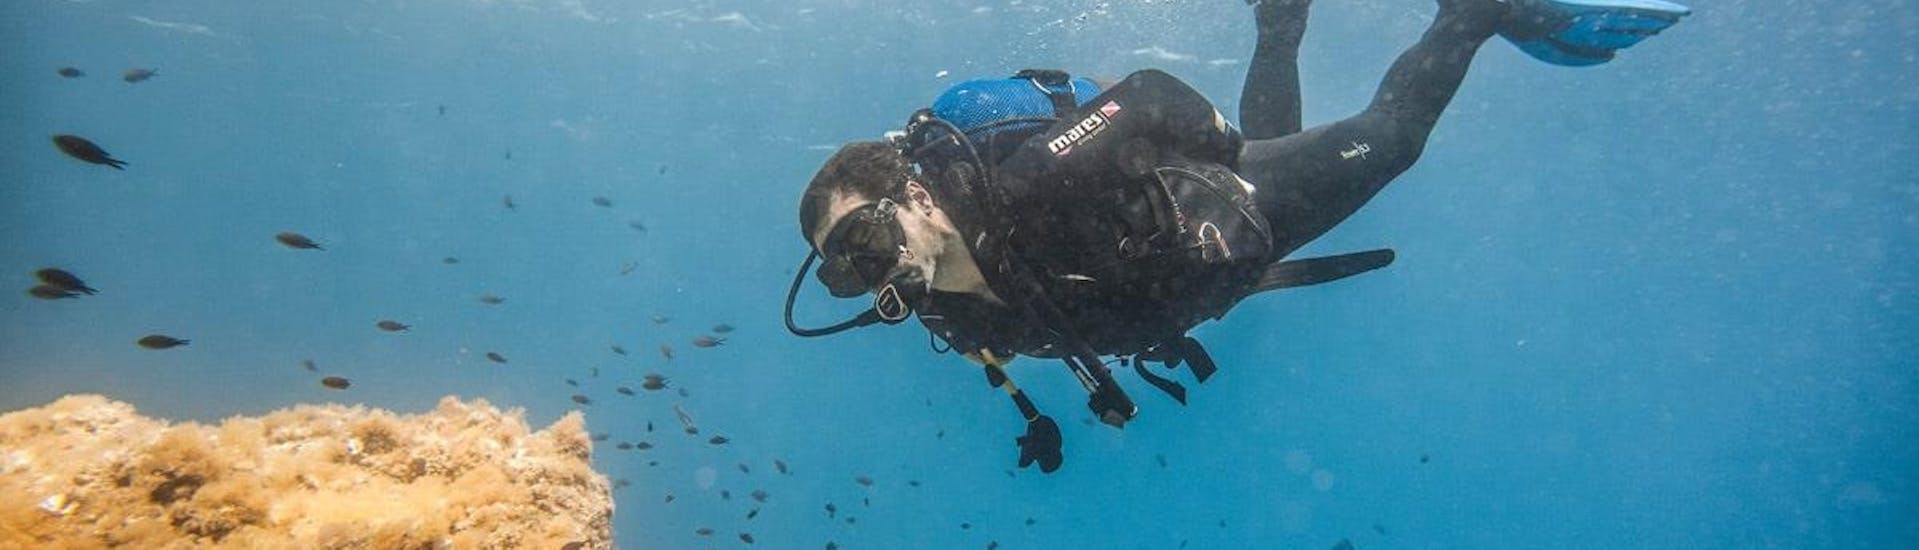 A scuba diver during the SSI Scuba Diver for Beginners in Elba with Aquanautic Elba.